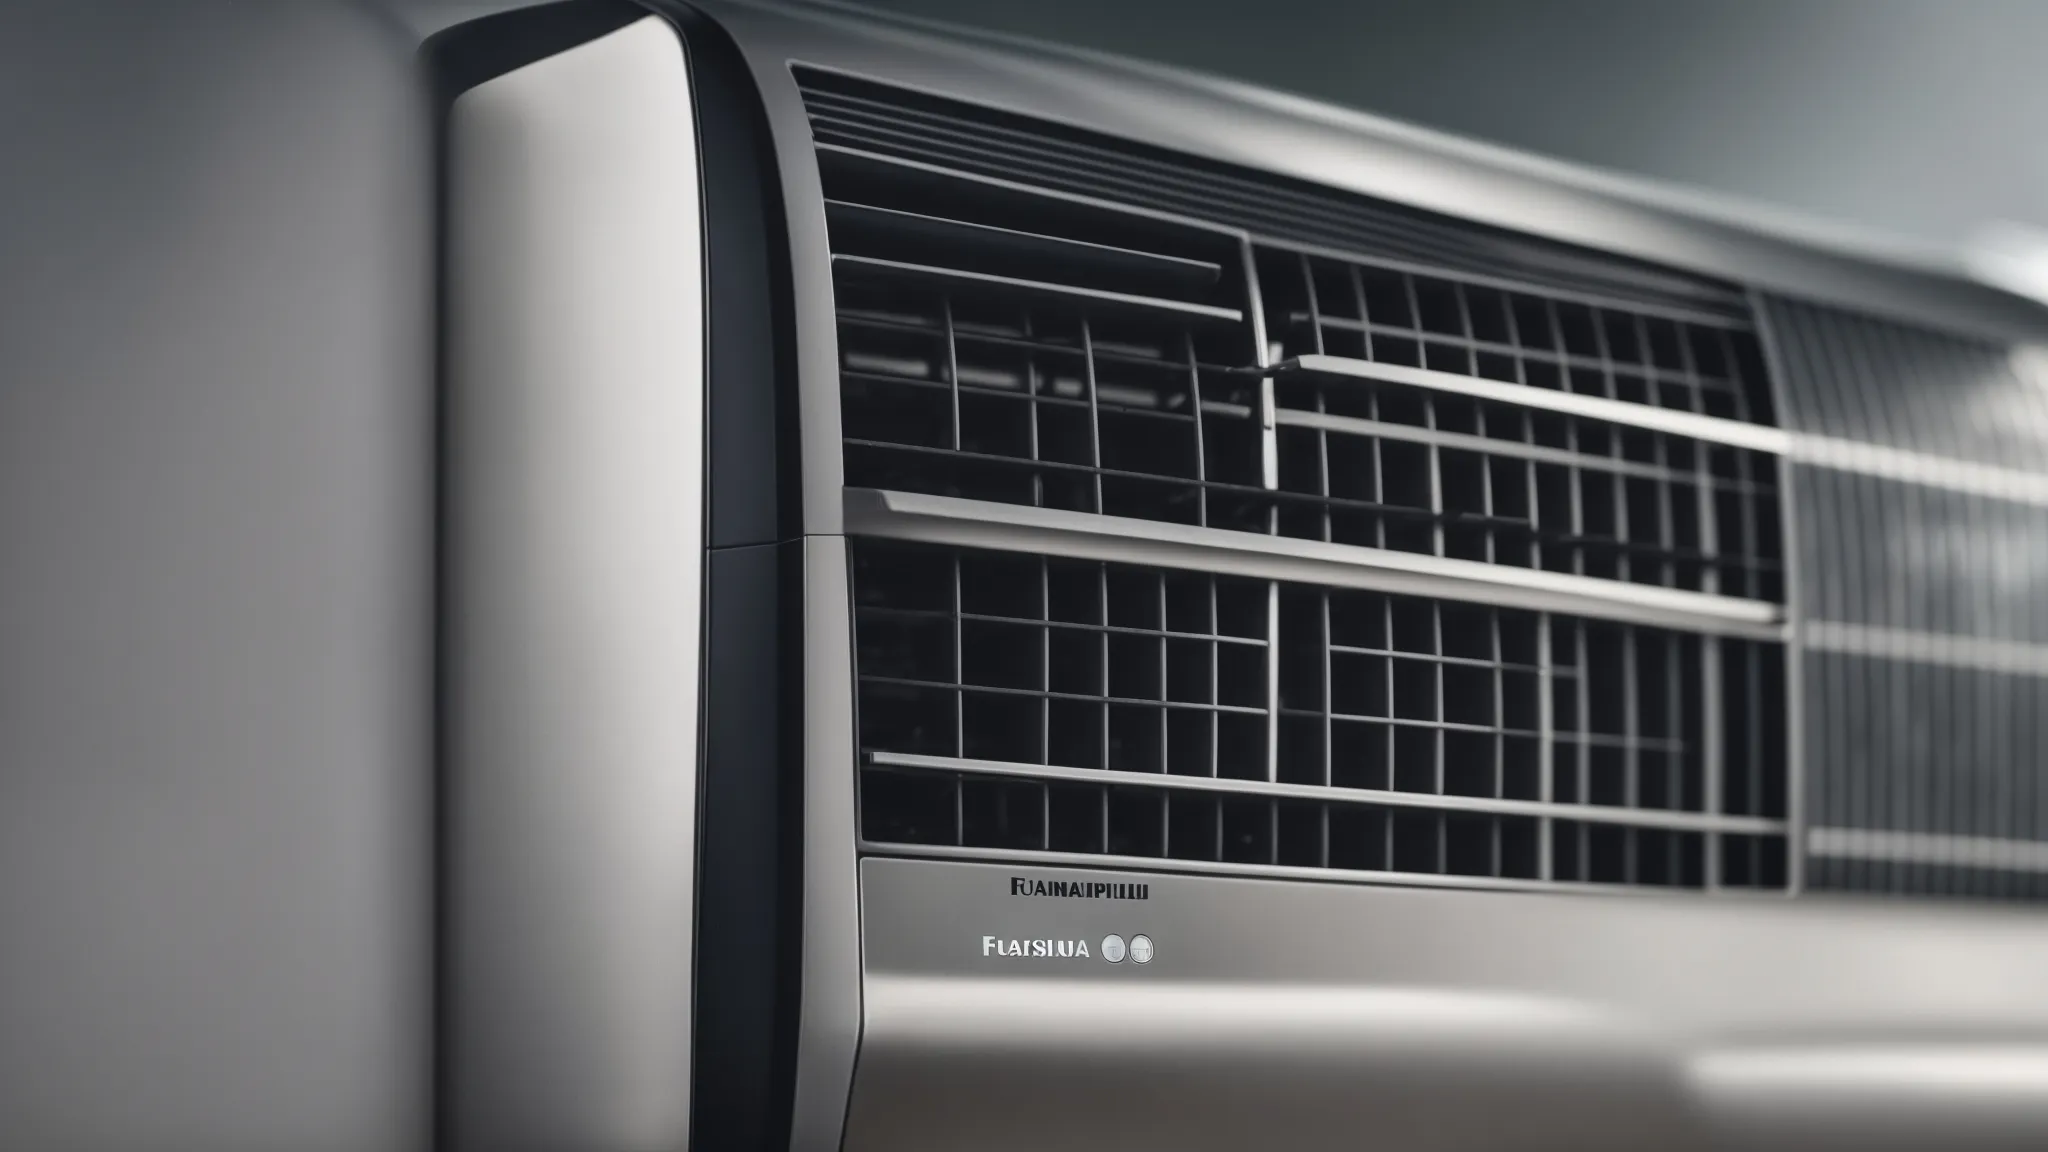 a close-up of a modern air conditioning unit with a sleek design, symbolizing cutting-edge hvac technology.